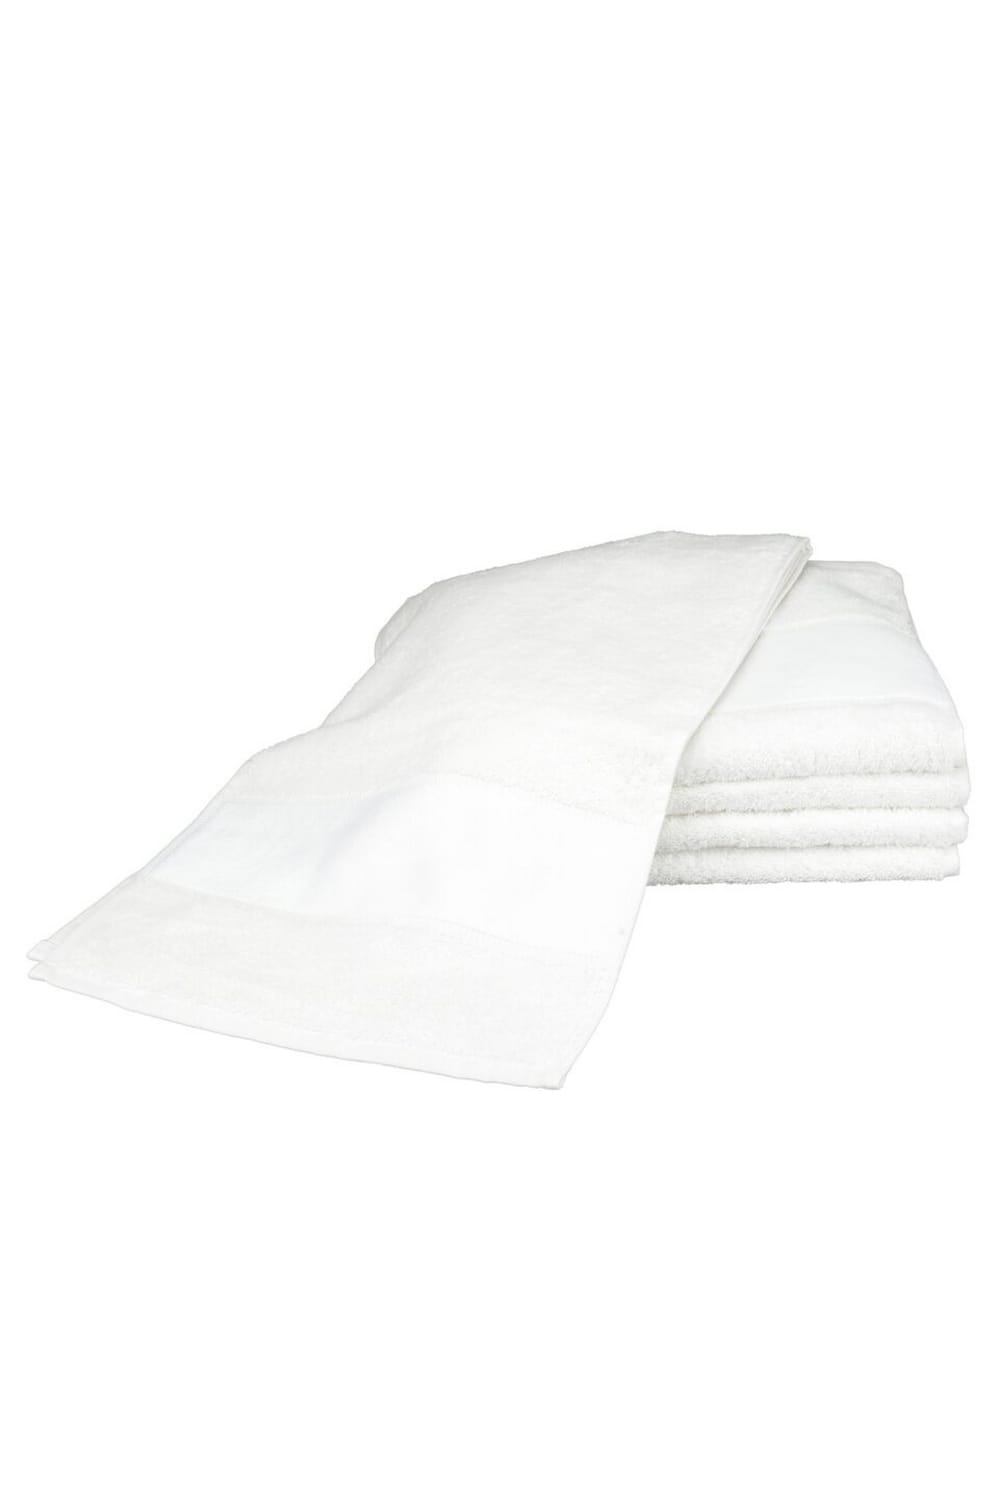 A&R Towels Subli-Me Sport Towel (White) (One Size)